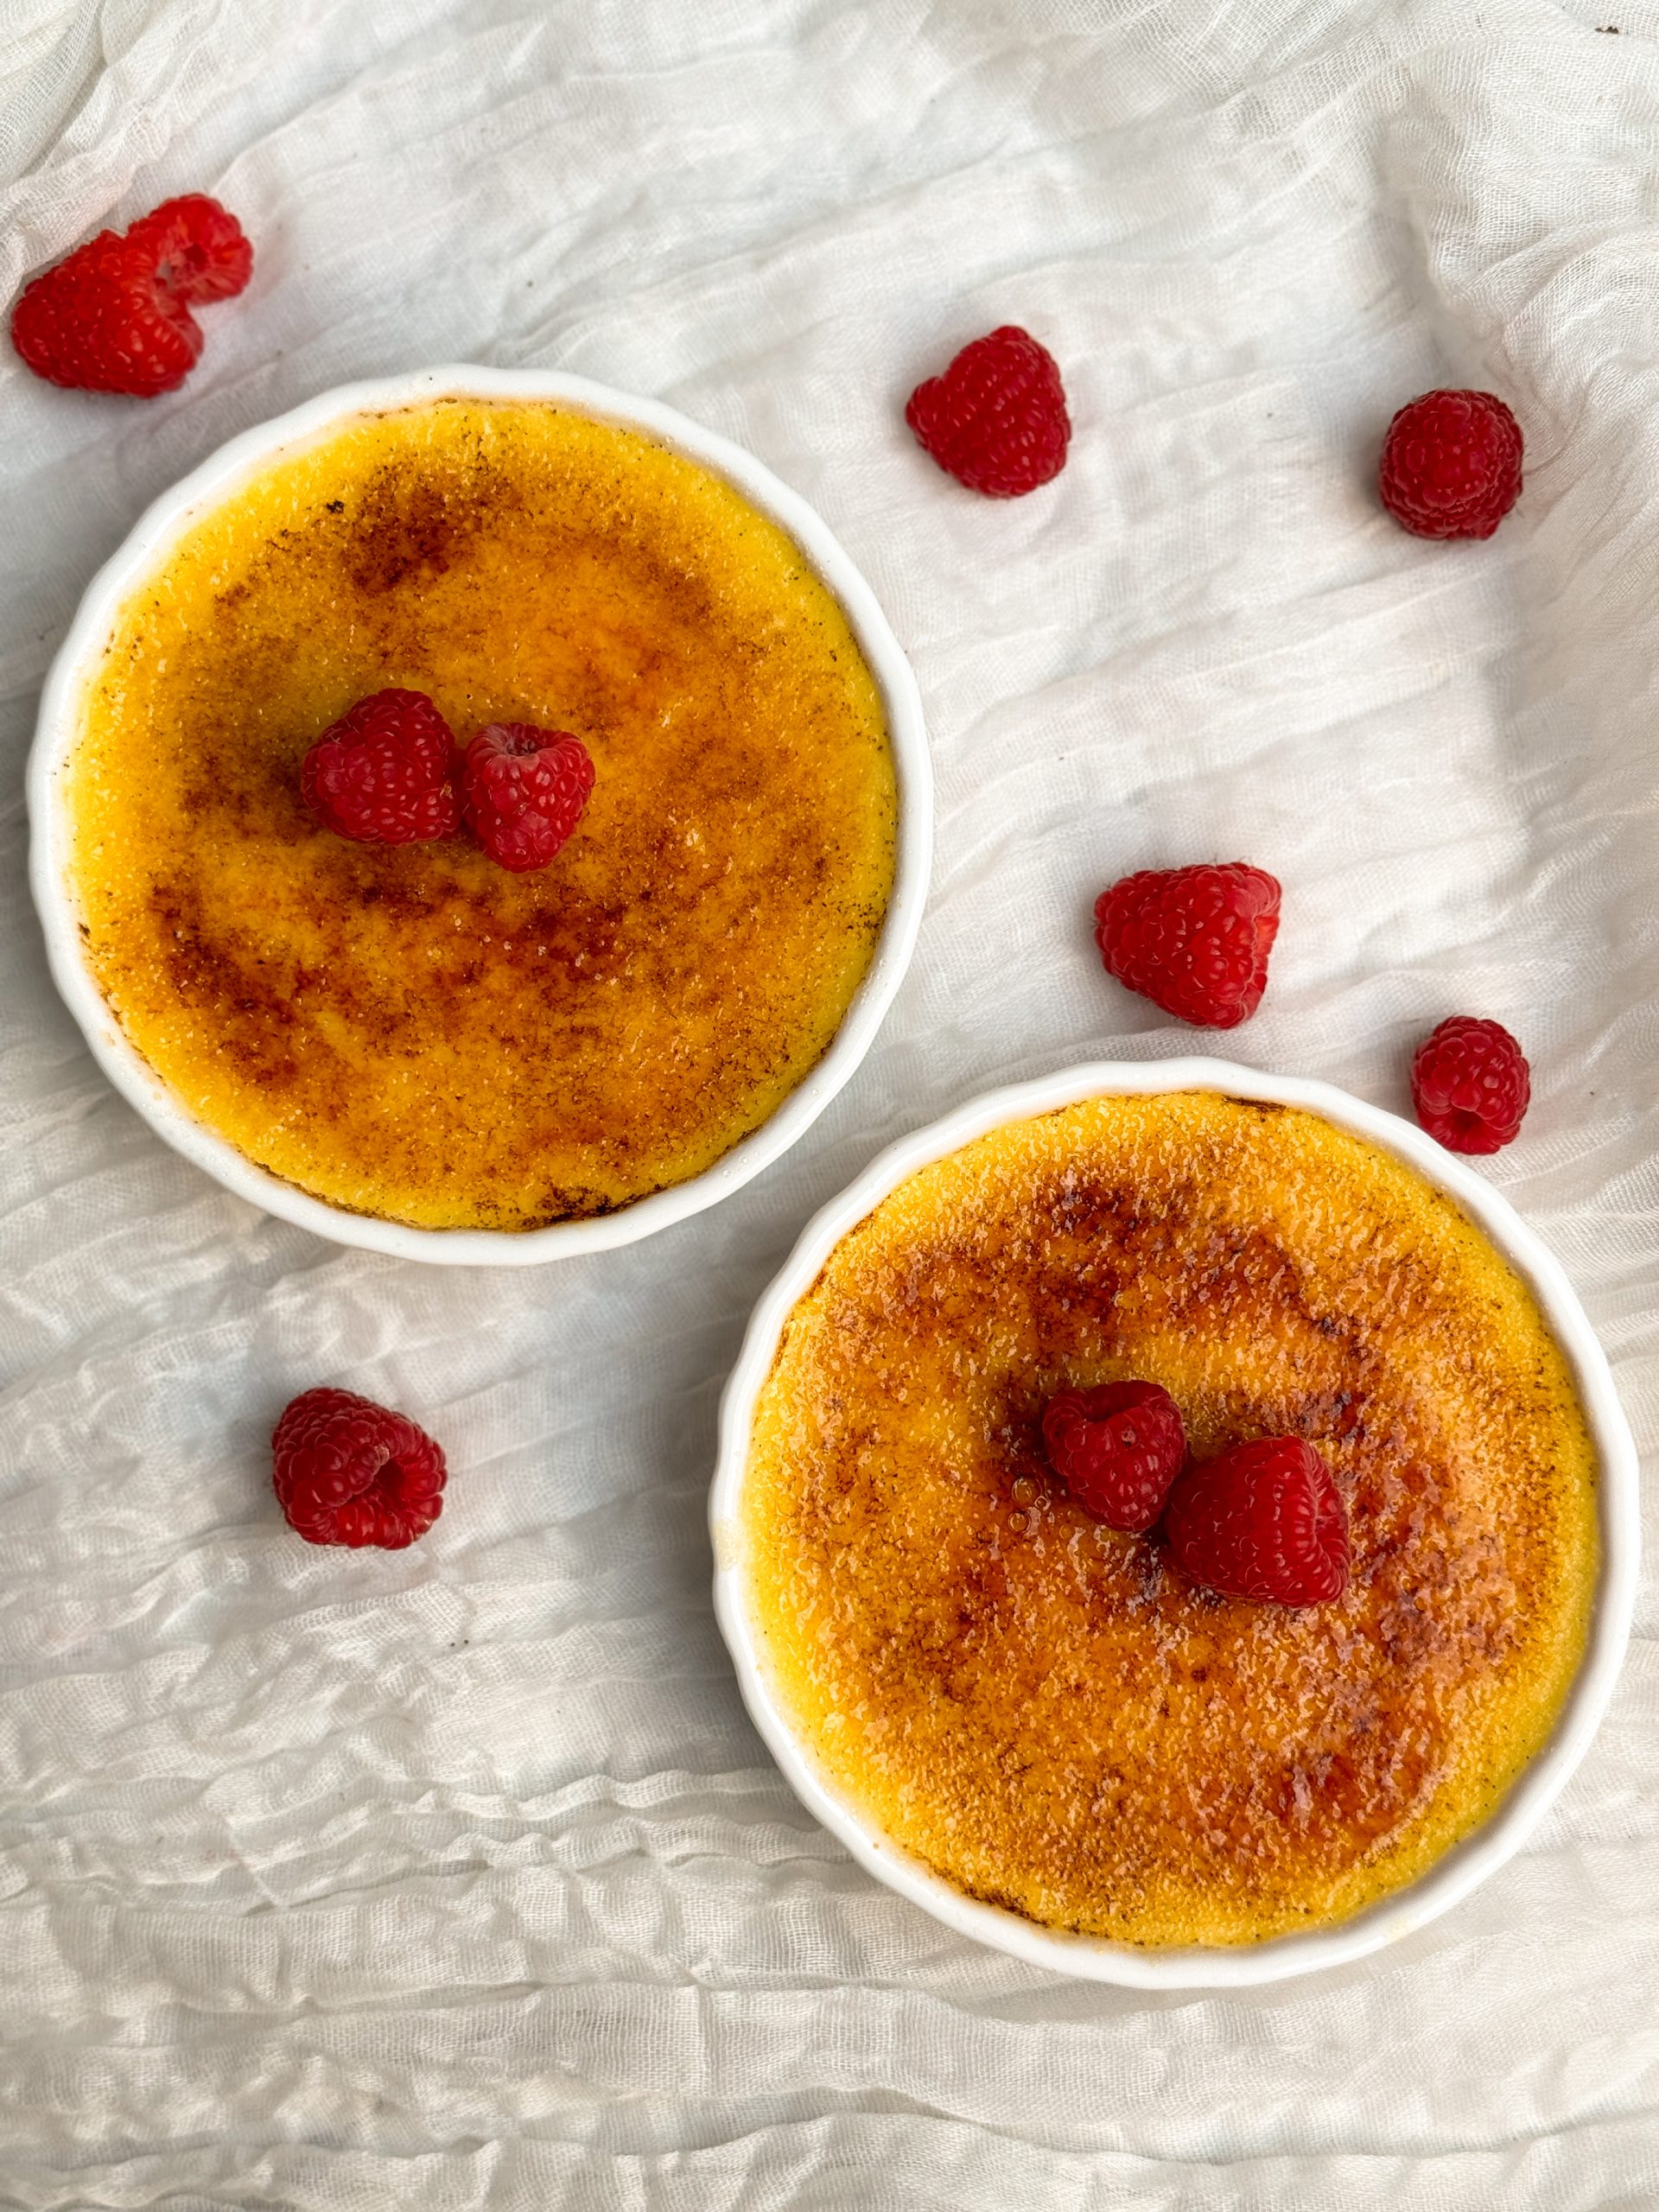 Two creme brulees in a white ramekins with a golden crispy sugar coating, decorated with raspberries